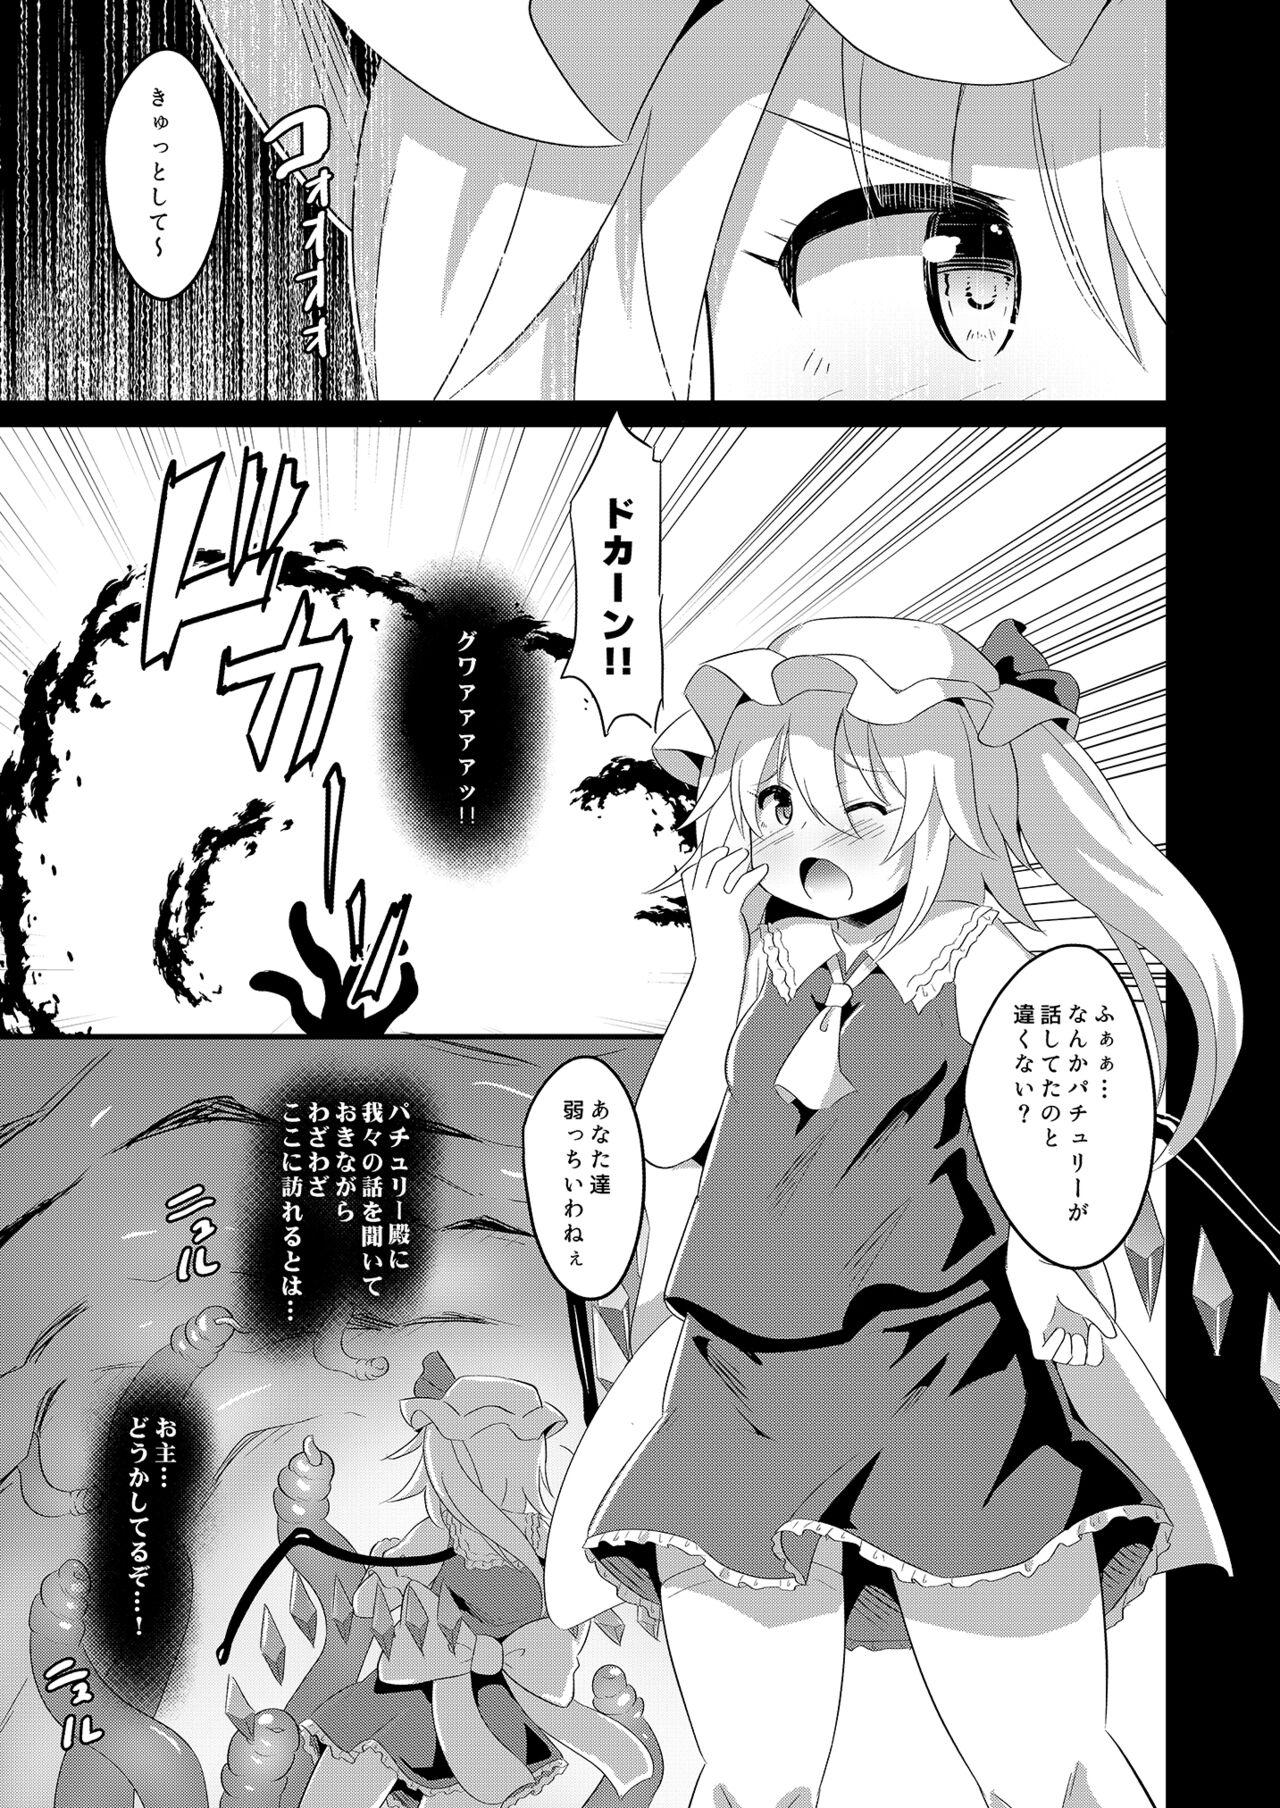 Asses Naedoko Flan-chan - Touhou project Toilet - Page 4